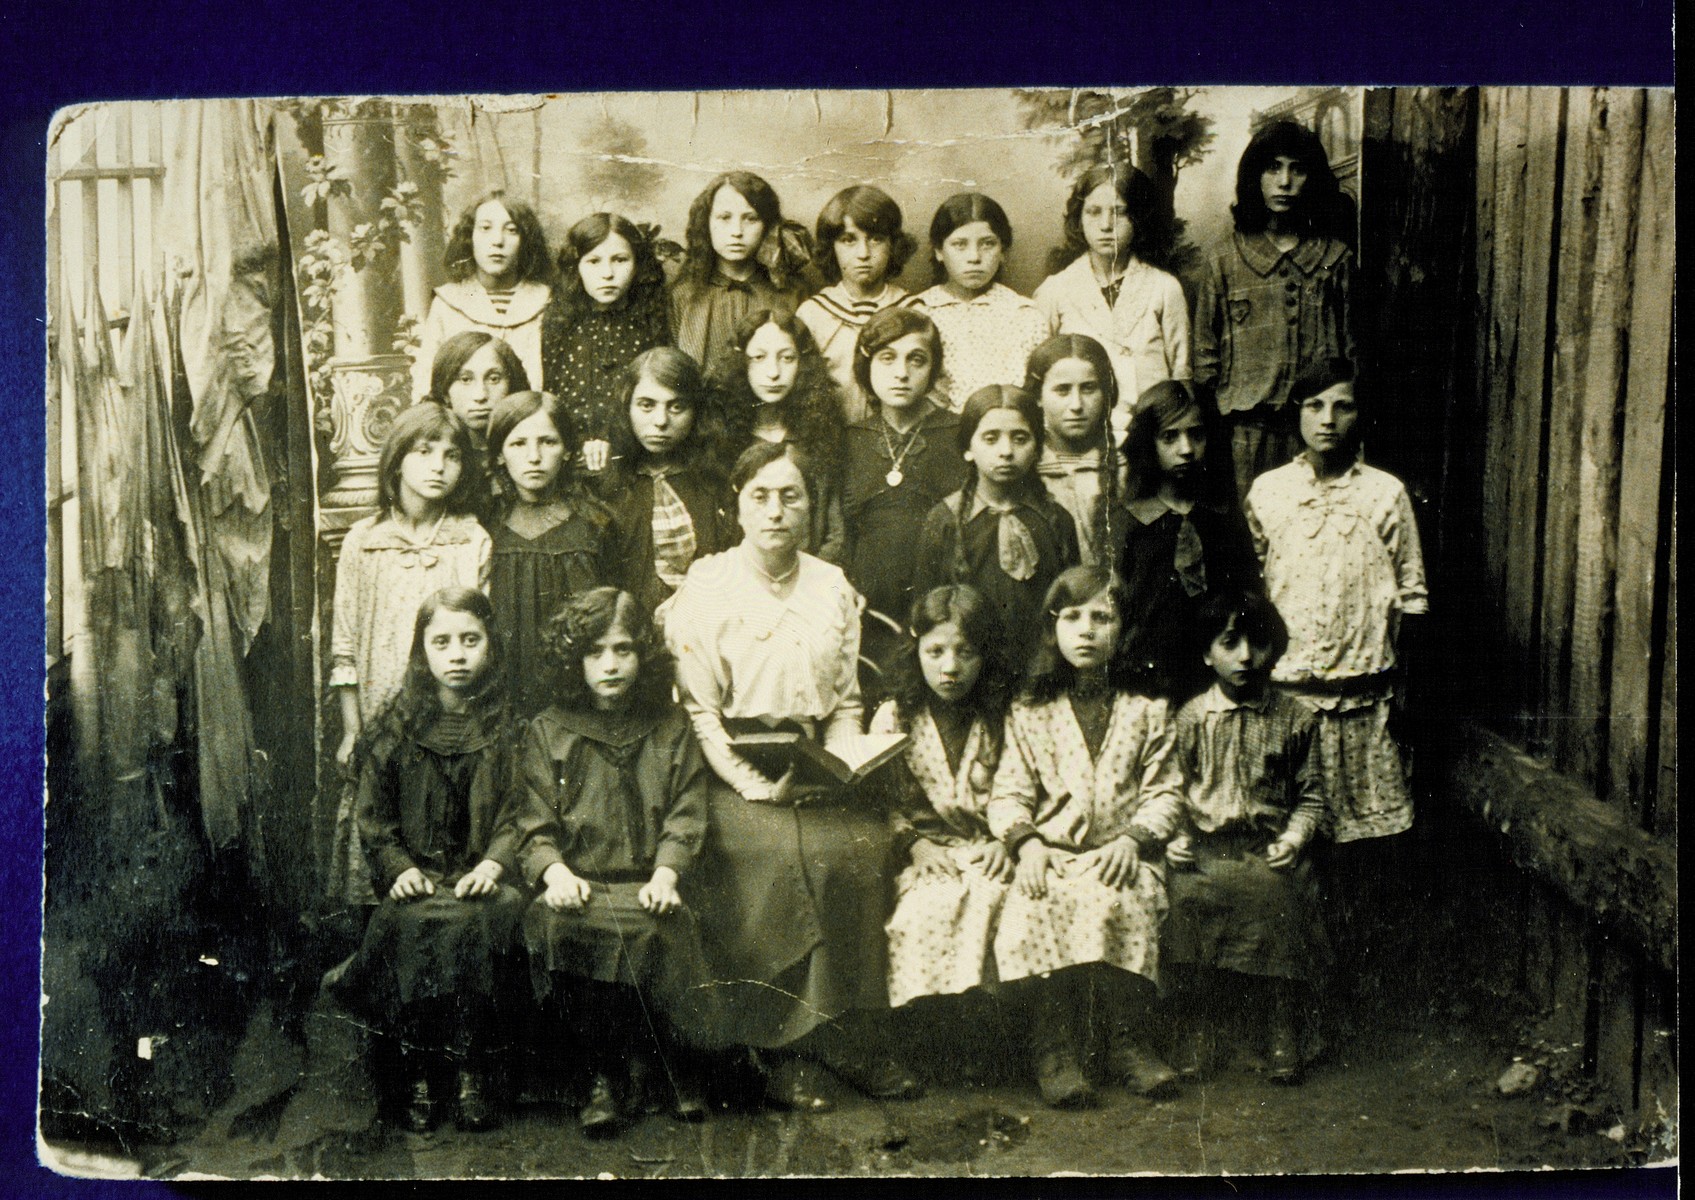 Students at the Yaffskaya Shkola, a school for girls founded circa 1911. 

The school's official languages were Russian and German, with courses in Yiddish.  Sitting in the center is the founder, Mrs. Yaffe.  To her left is Zipporah Lubetski.    Zipporah and her sisters emigrated to Palestine and America, as did a few other girls in the photo.  Also pictured are two Kanichowsk sisters (possibly Kreinele and Gutke). The majority of the girls were murdered by the Germans during the September 1941 mass killing action in Eisiskes and other locations.